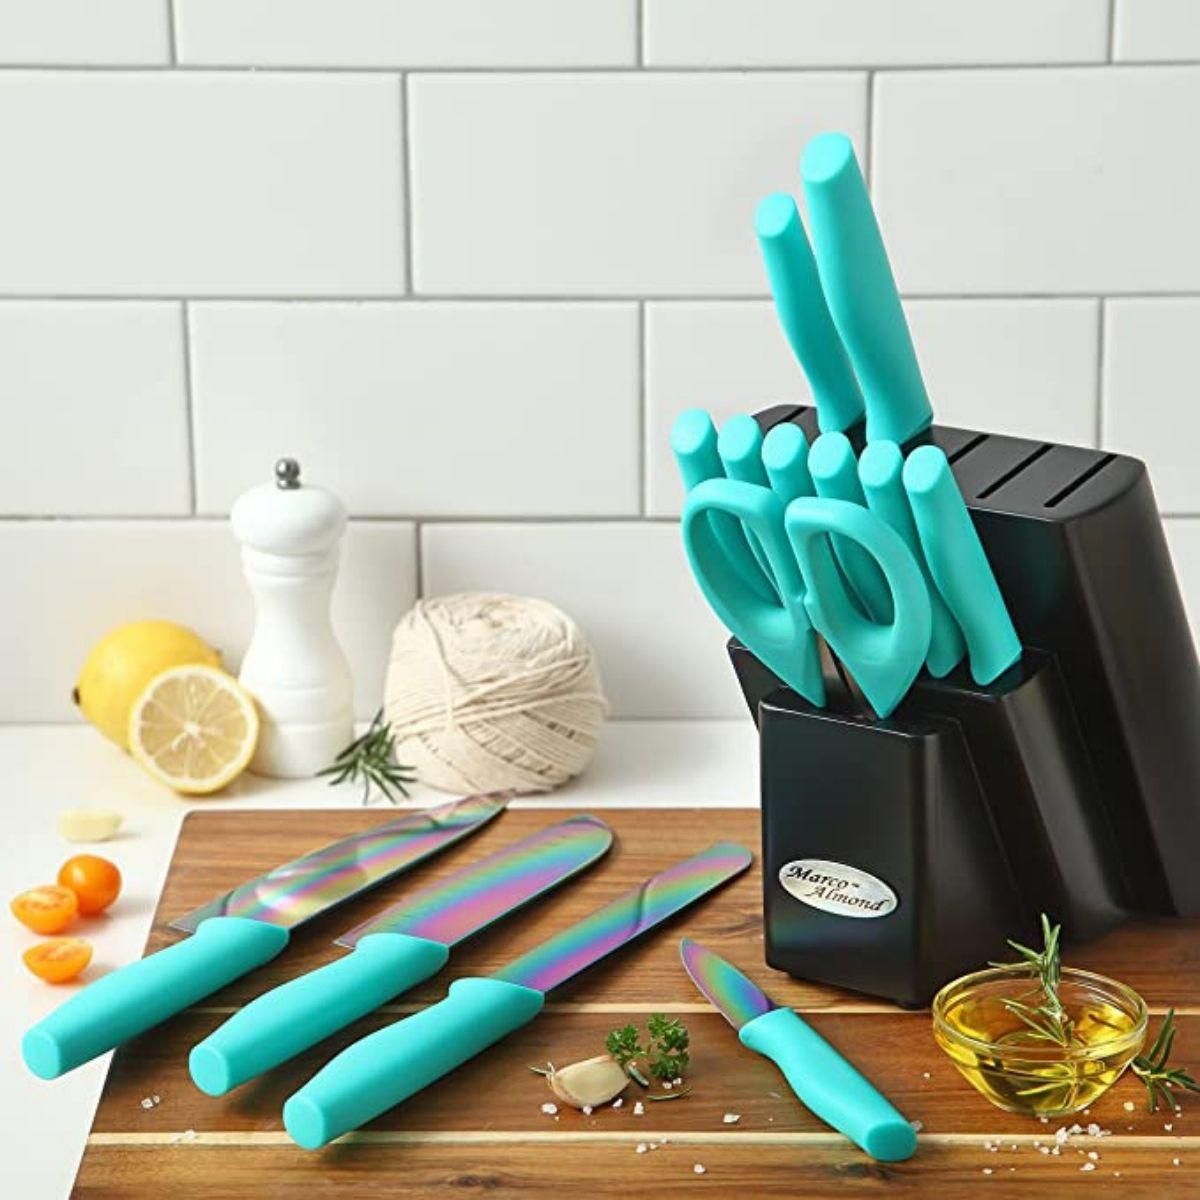 You Should Already Own These Useful Kitchen Products.